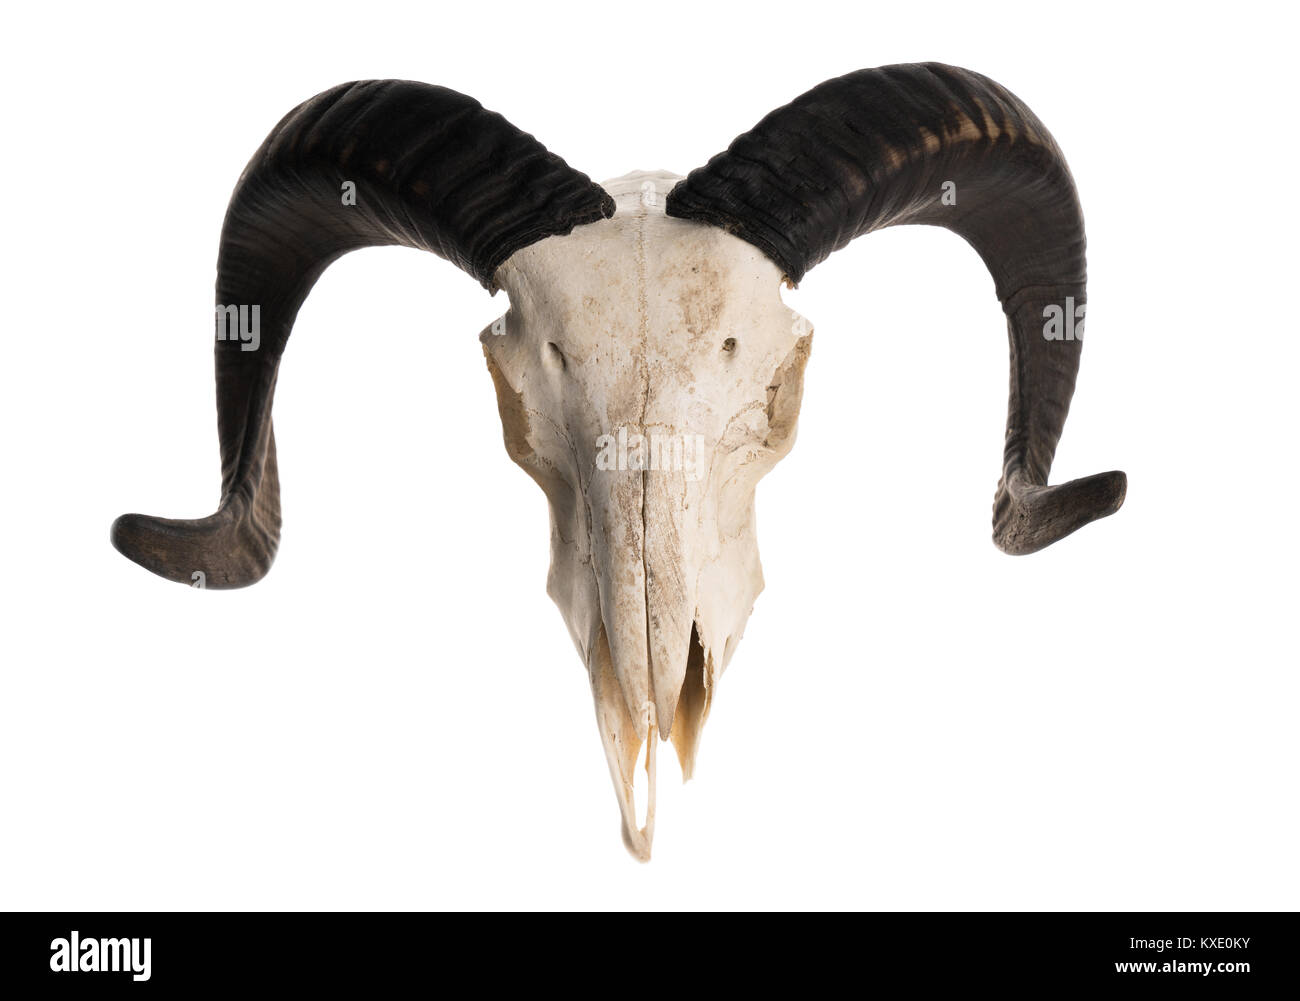 High angle view of a ram skull with horns, isolated on white background Stock Photo